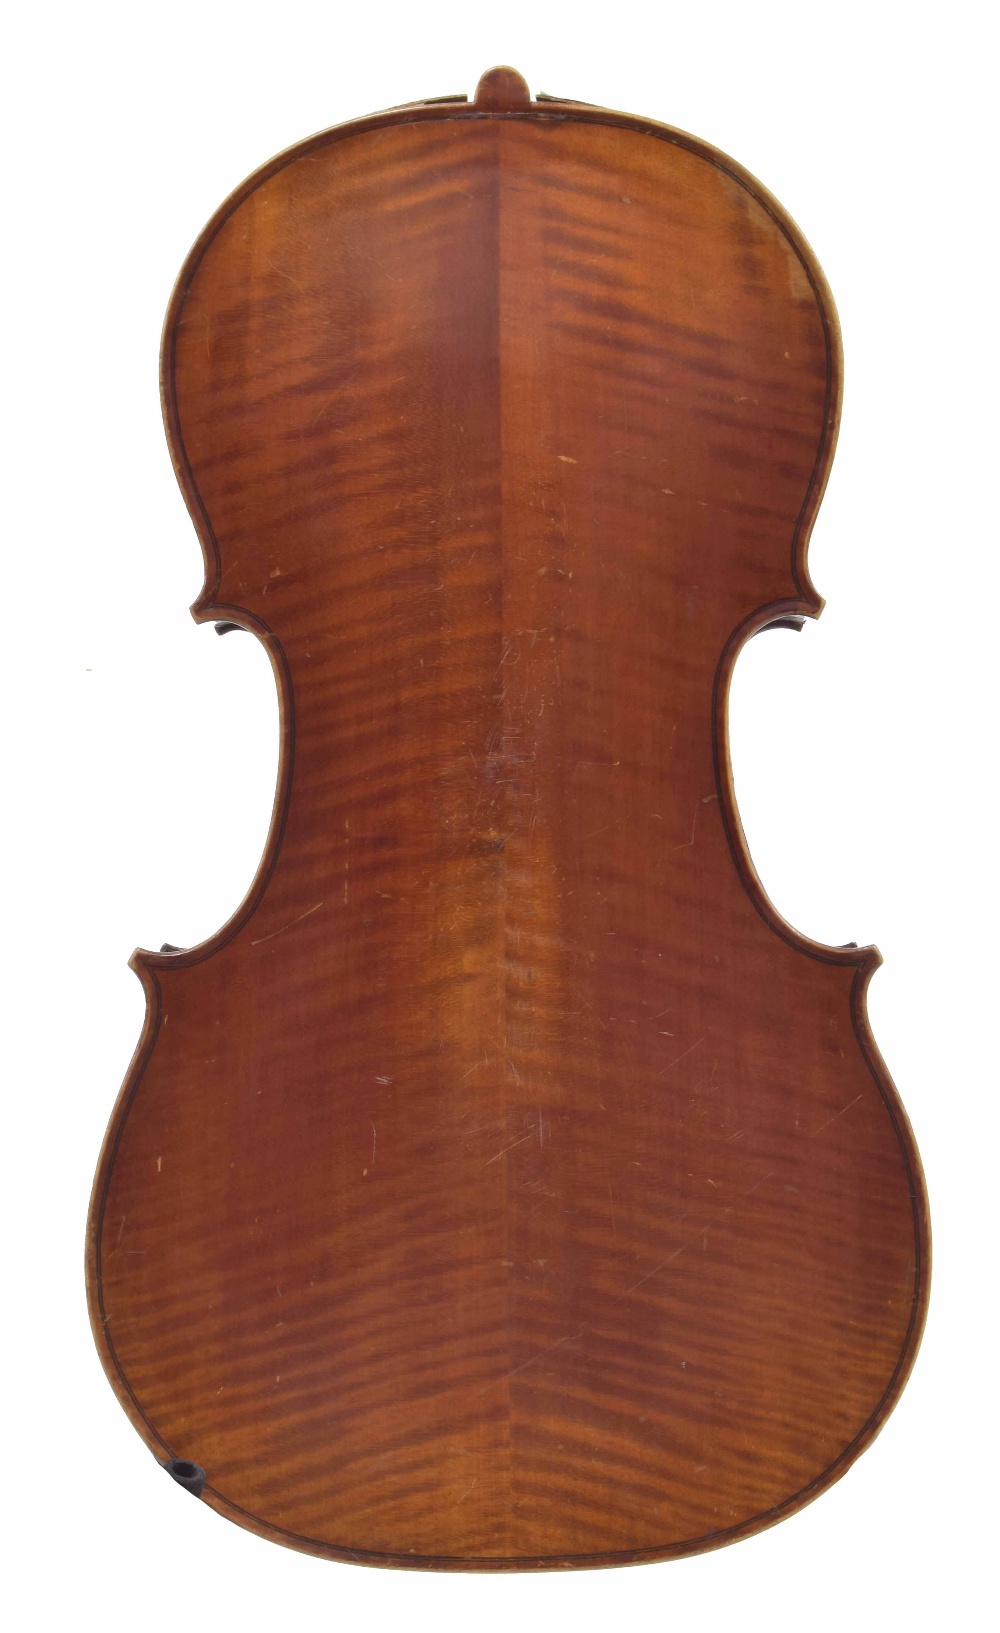 French half size violoncello circa 1910, 24 7/8", 63.10cm (neck detached from body) - Image 2 of 3